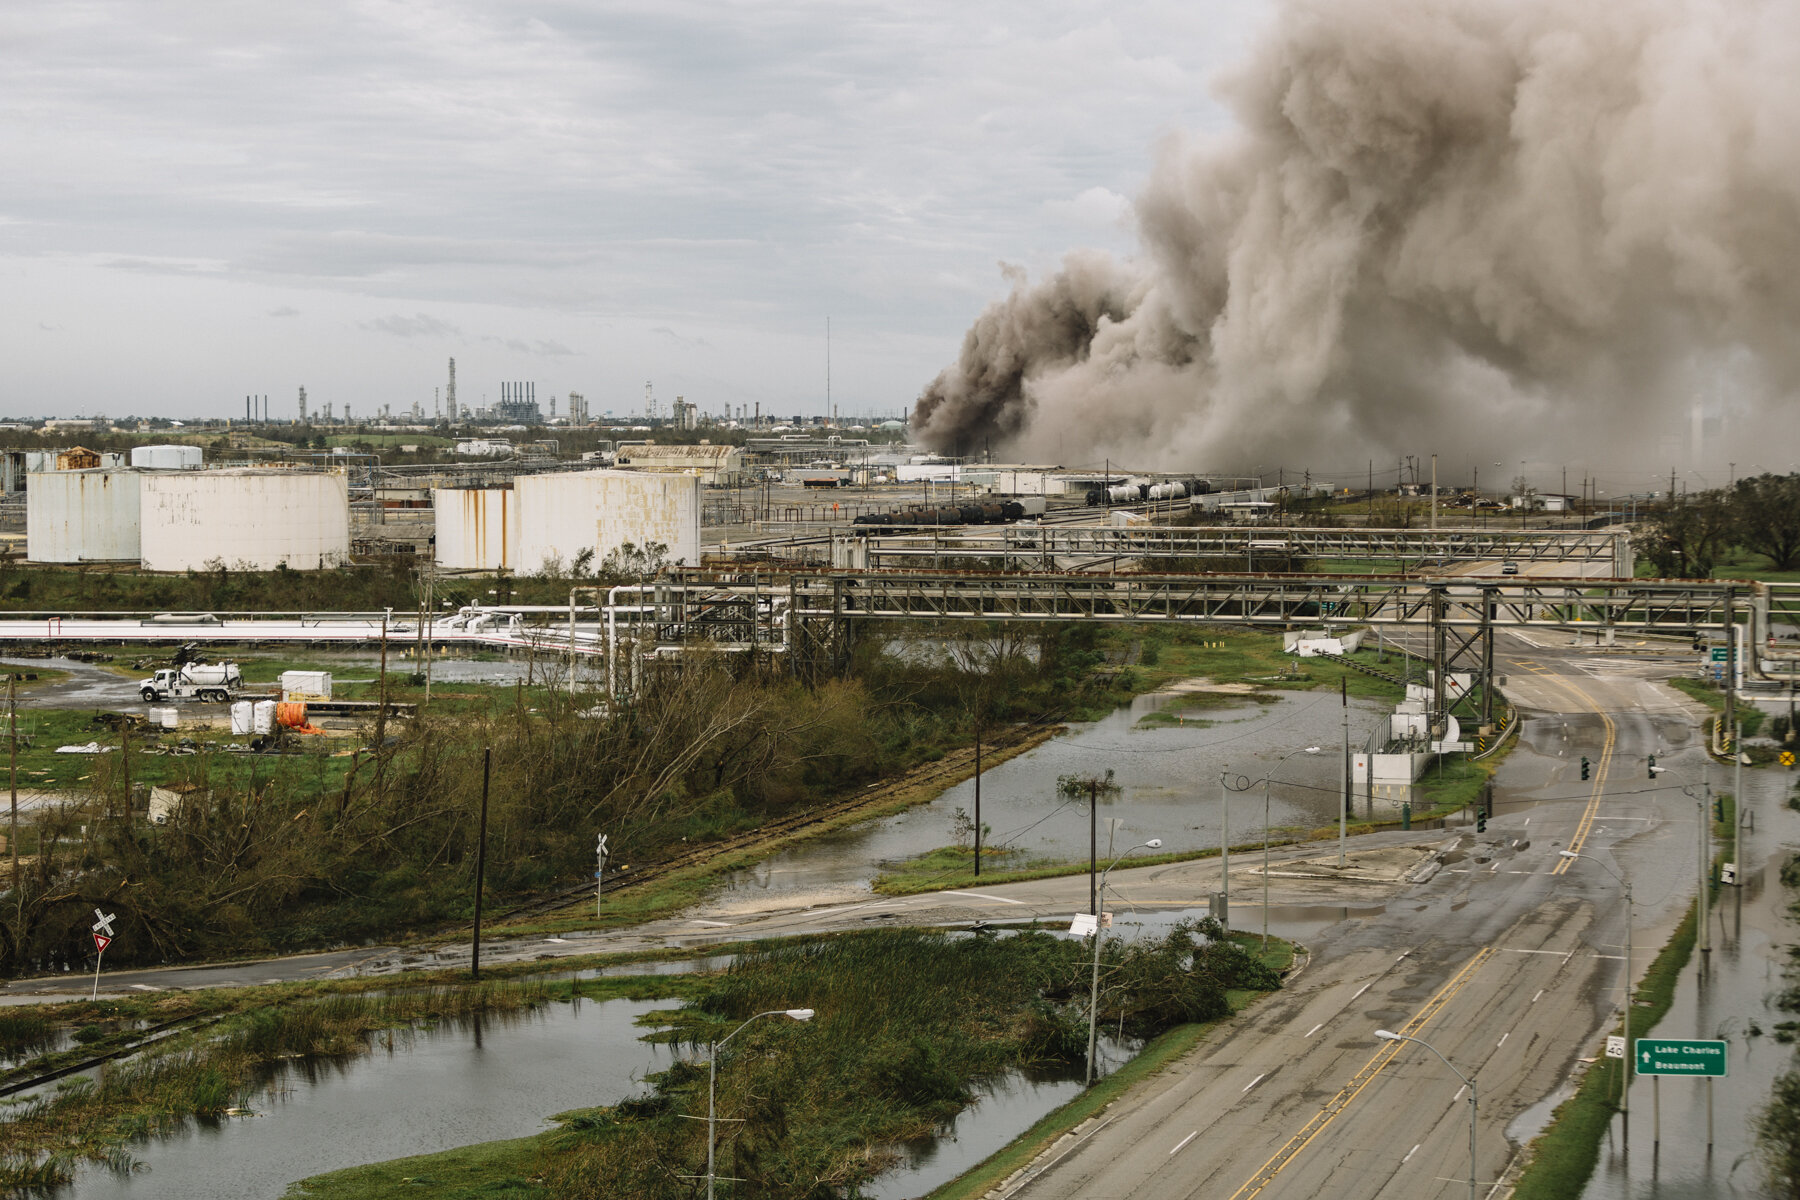  NYTSTORM - Westlake, LA - August 27, 2020 - A fire burned at a BioLab industrial site across the Calcasieu River from downtown Lake Charles. Hurricane Laura's high winds and storm surge had a devastating impact on downtown Lake Charles and the surro